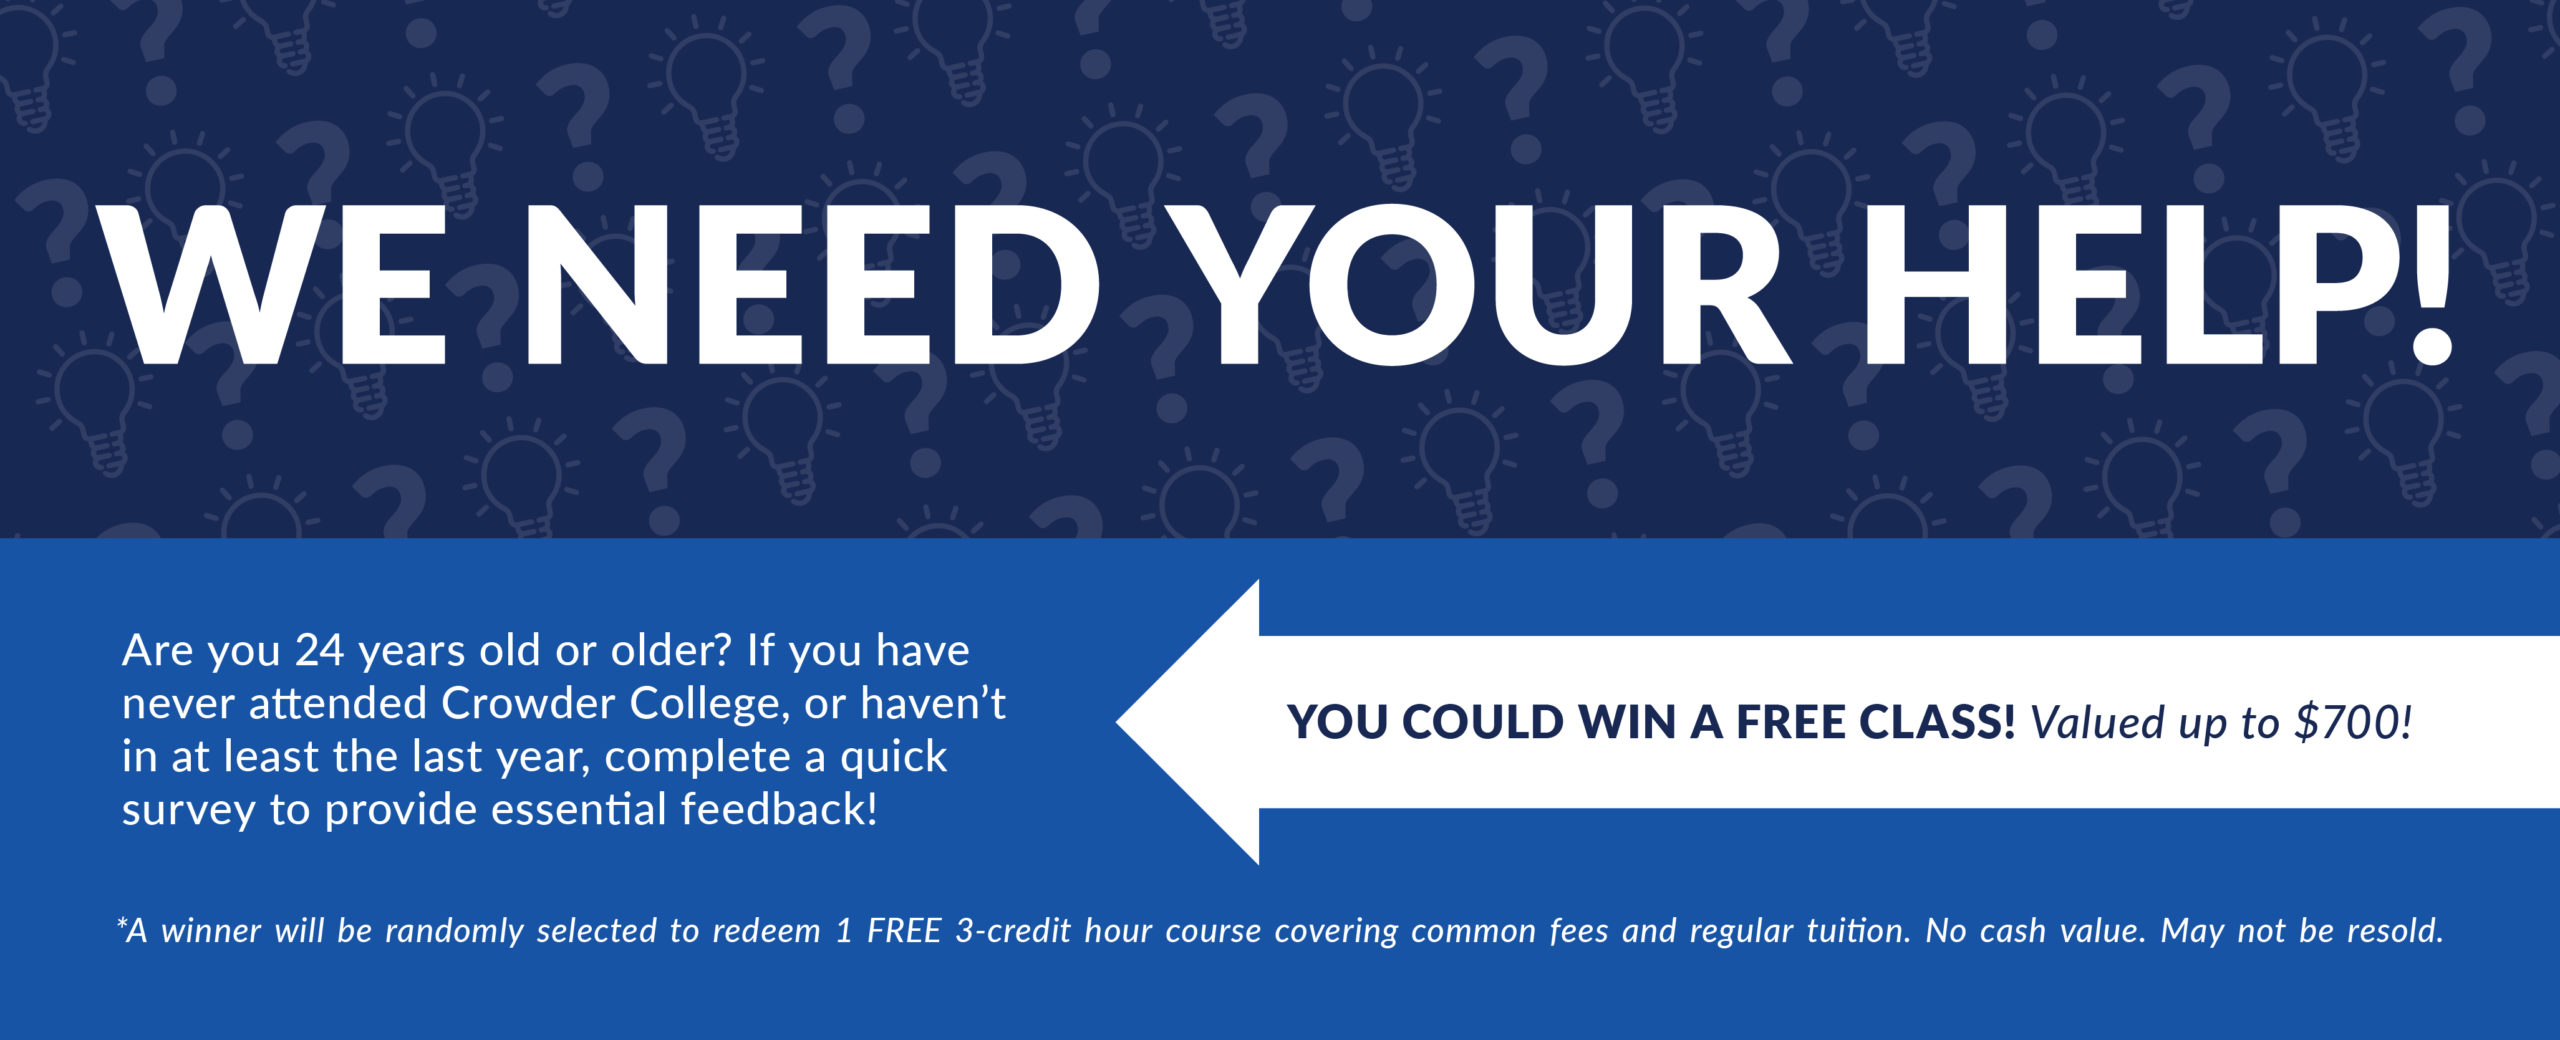 We need your help! Are you 24 years old or older? If you have never attended Crowder College, or haven't in the last year complete a quick survey and enter to win a free class